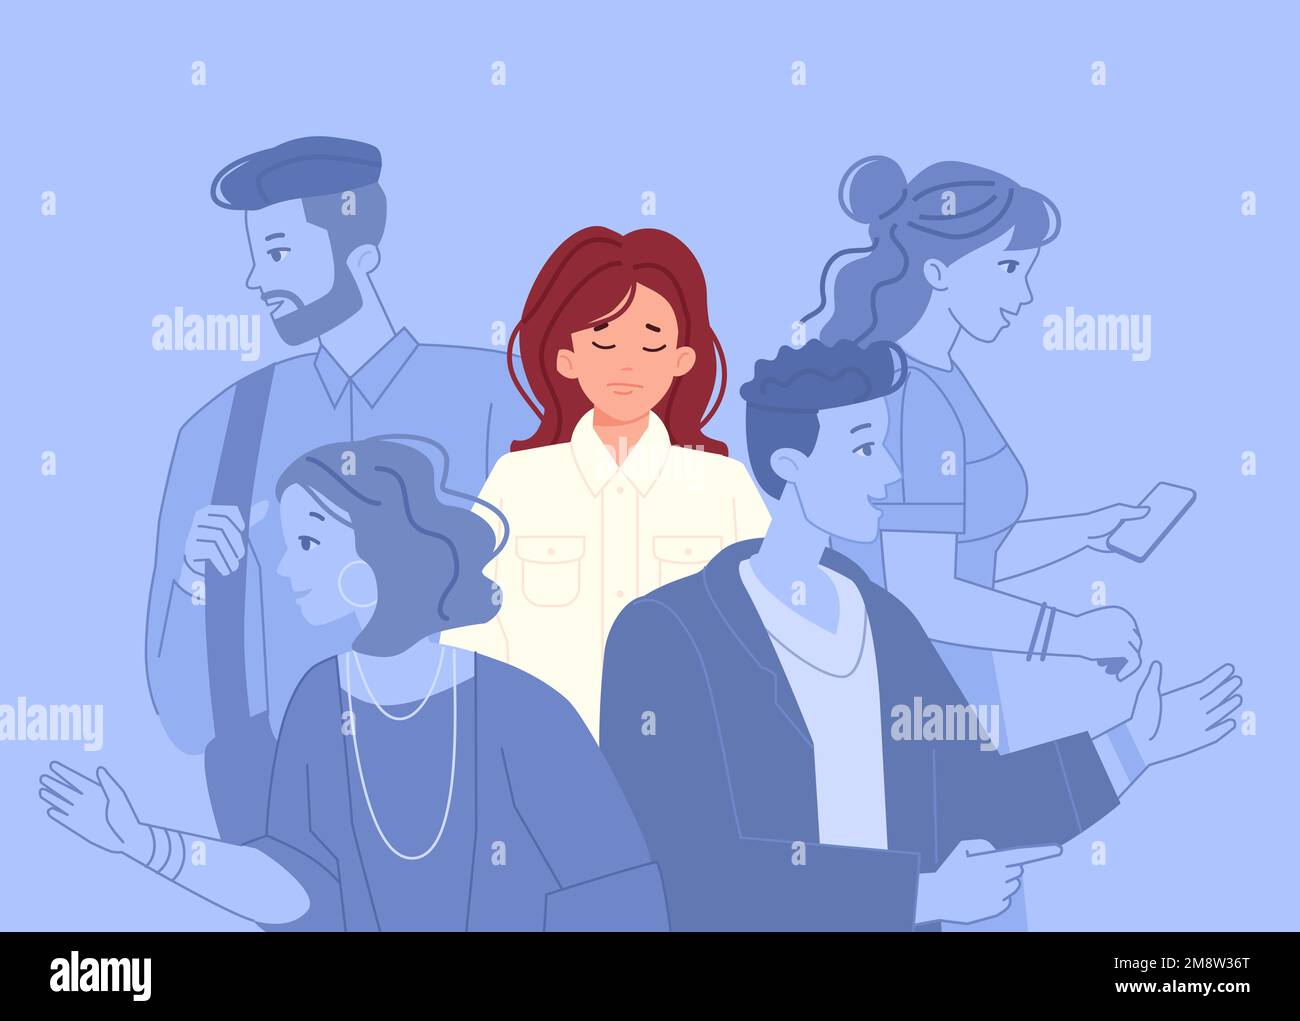 Woman outcaste. Lonely girl in crowd, depressed child alone at social communicating silhouettes, depressed female emotional mental solitude vector illustration of woman lonely and sad alone Stock Vector